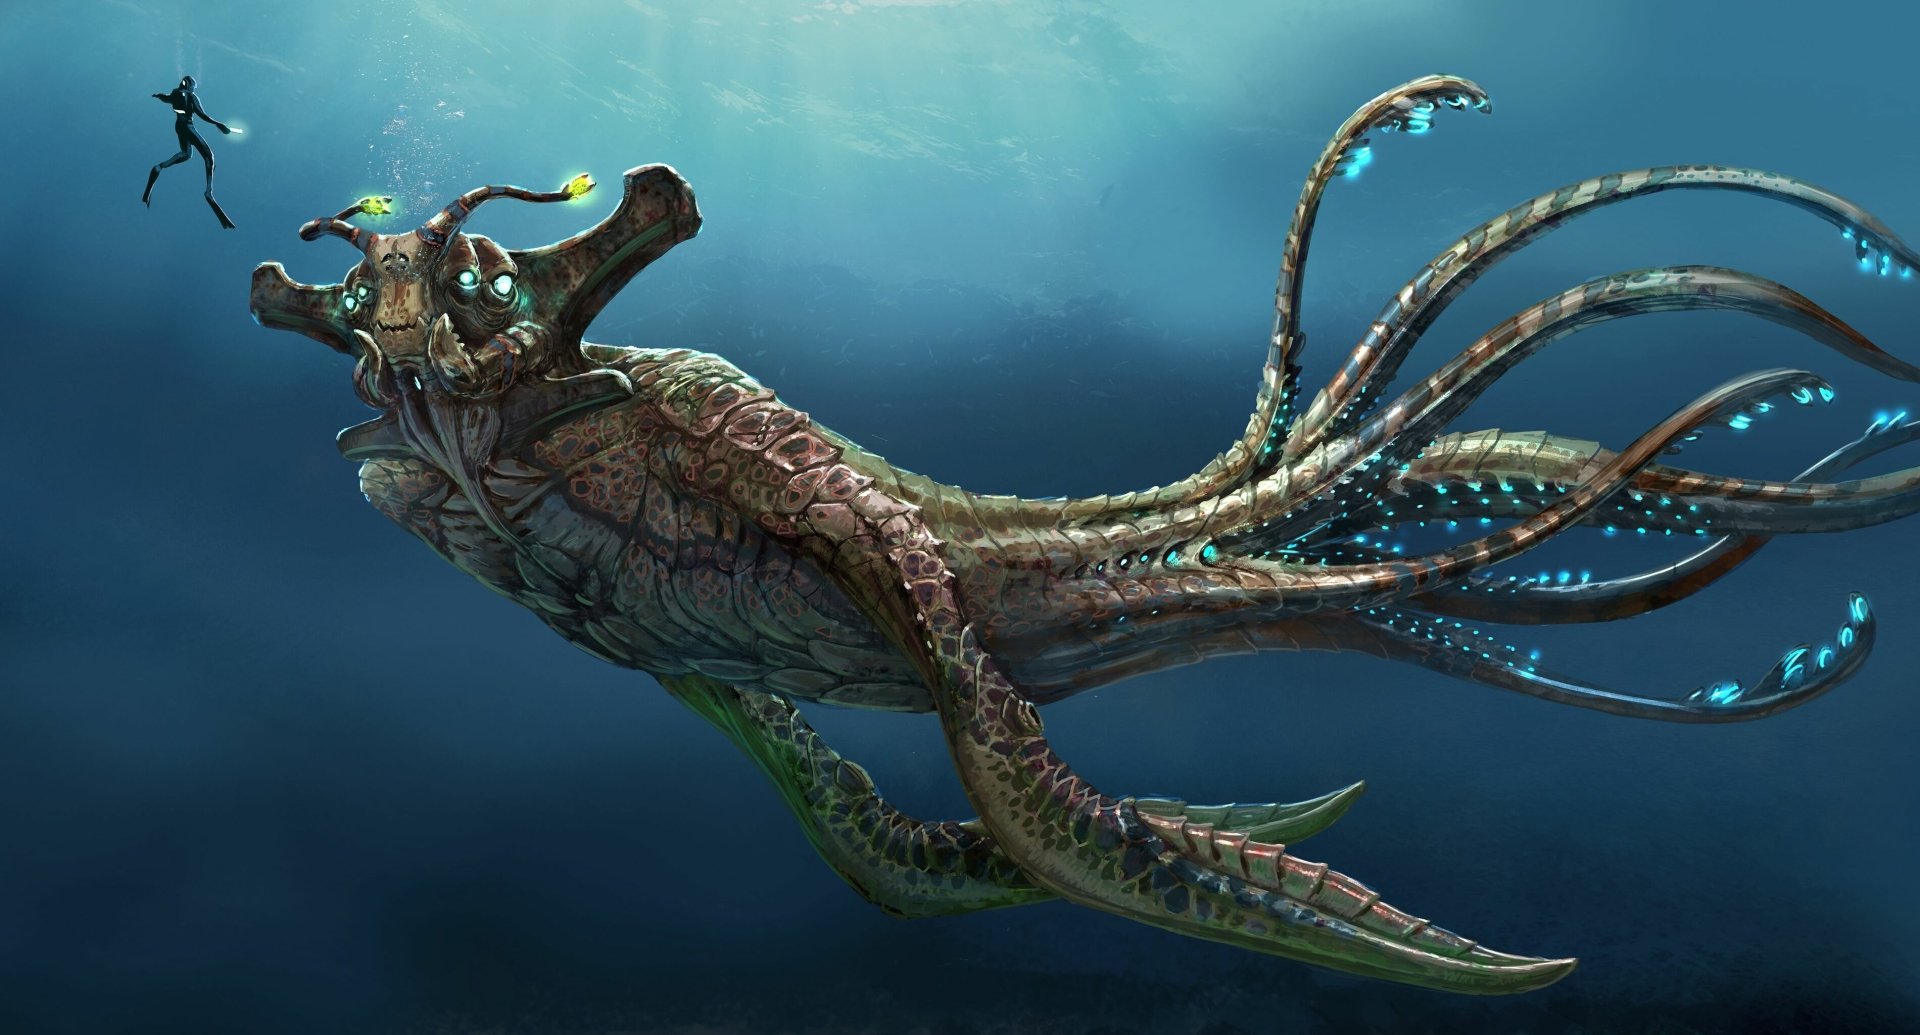 Subnautica Hd Wallpaper  Background Image  3800X2049  Id901049 - Wallpaper Abyss-8035